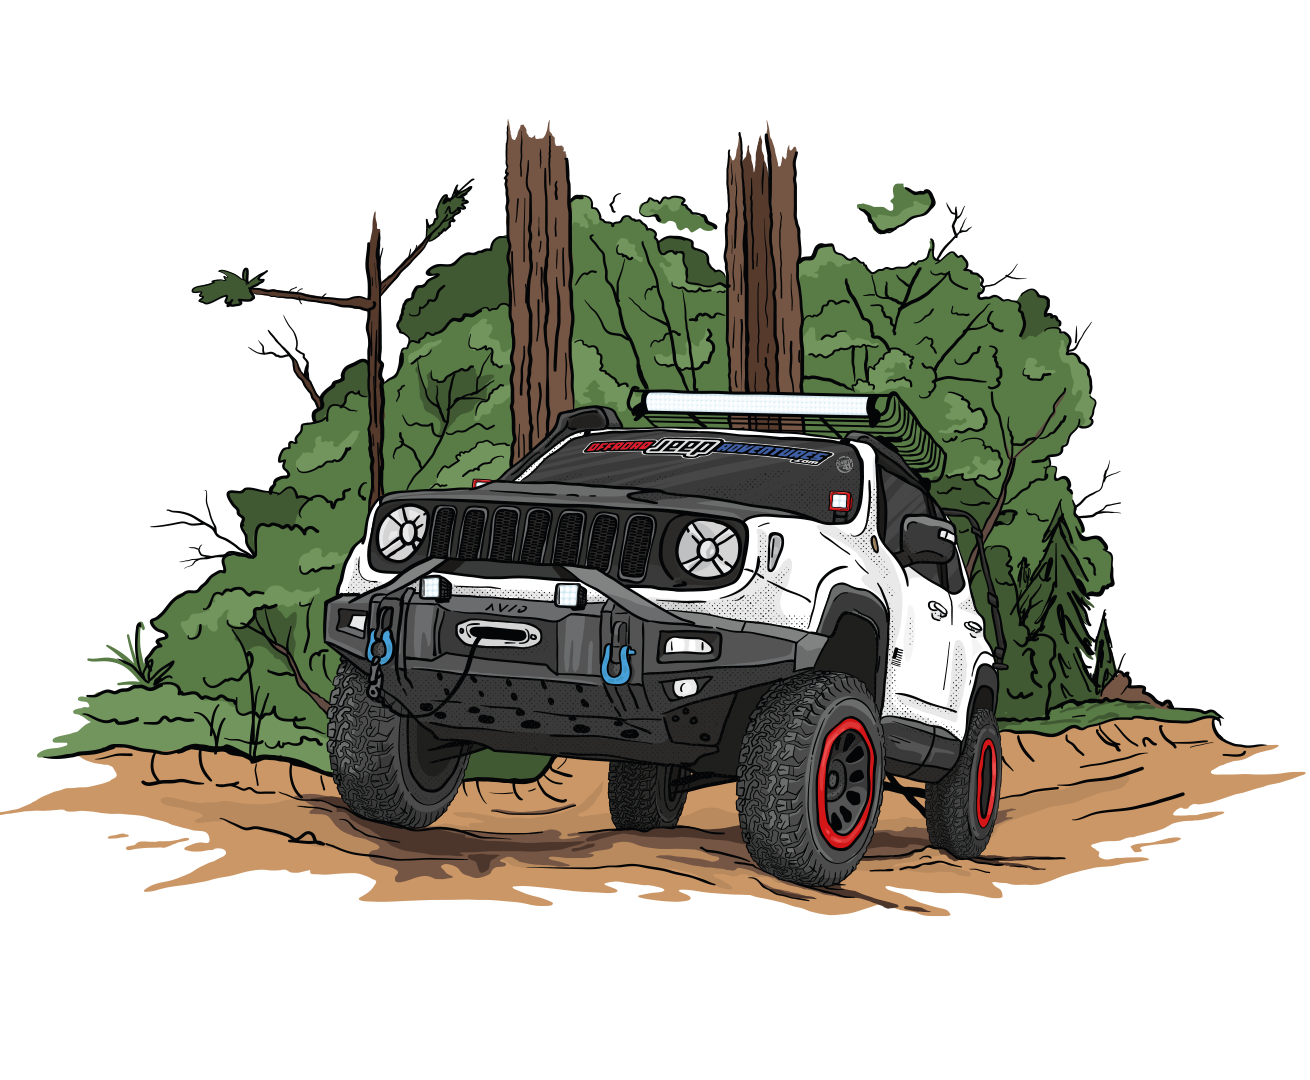 Lexica - Remote Control Jeep cartoon drawing going over mountain terrain,  black and white pencil drawing, crisp on white background